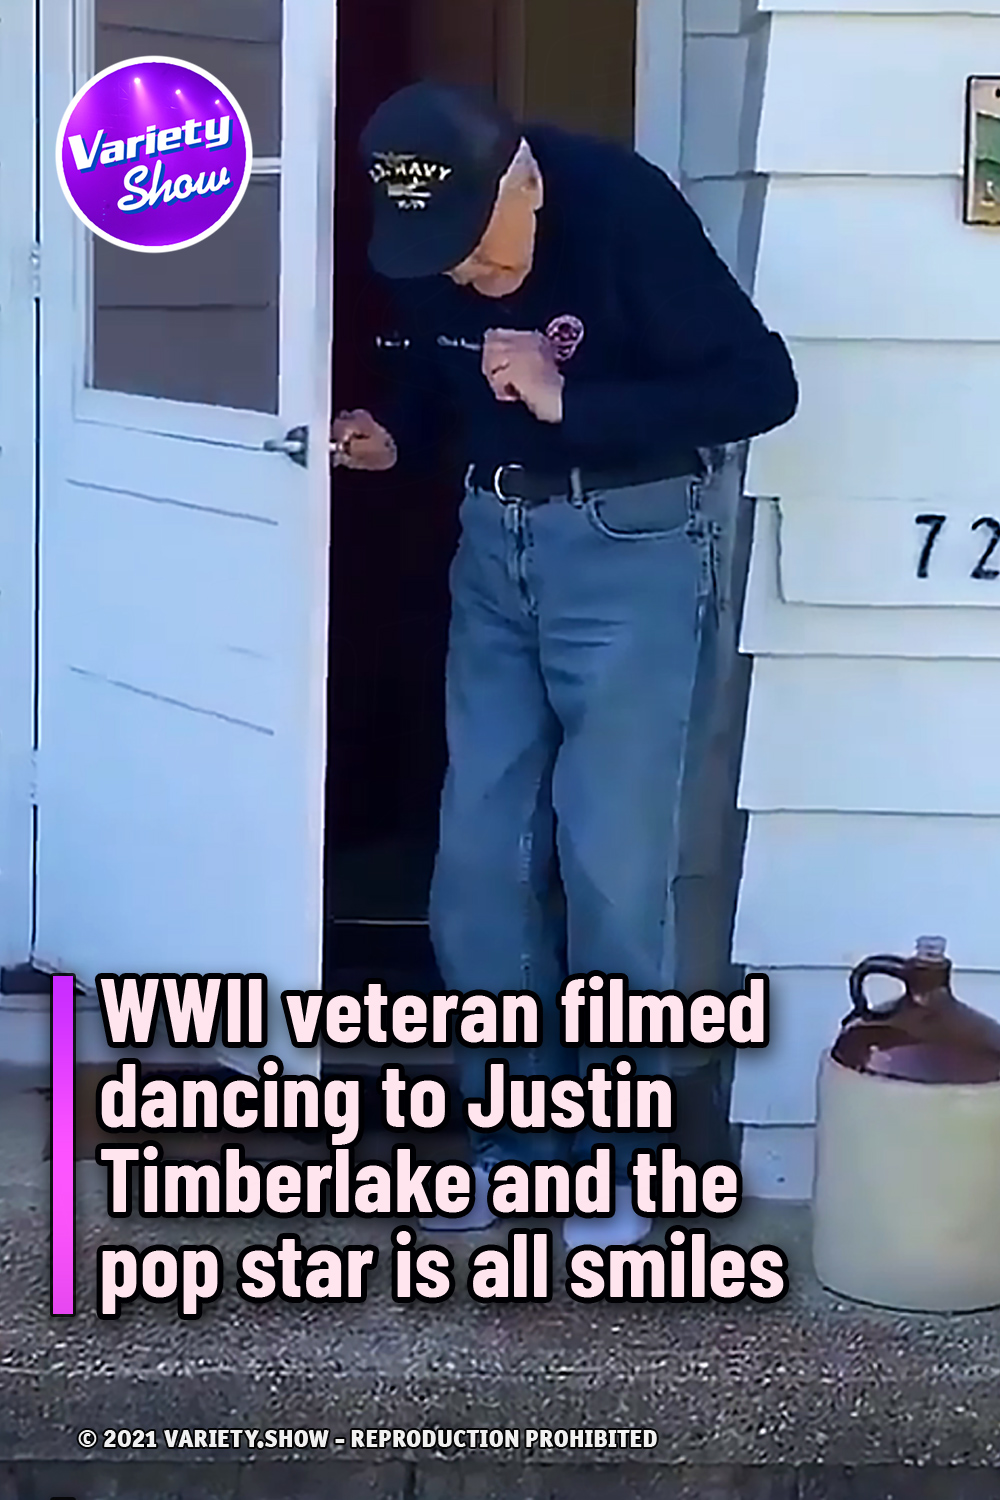 WWII veteran filmed dancing to Justin Timberlake and the pop star is all smiles